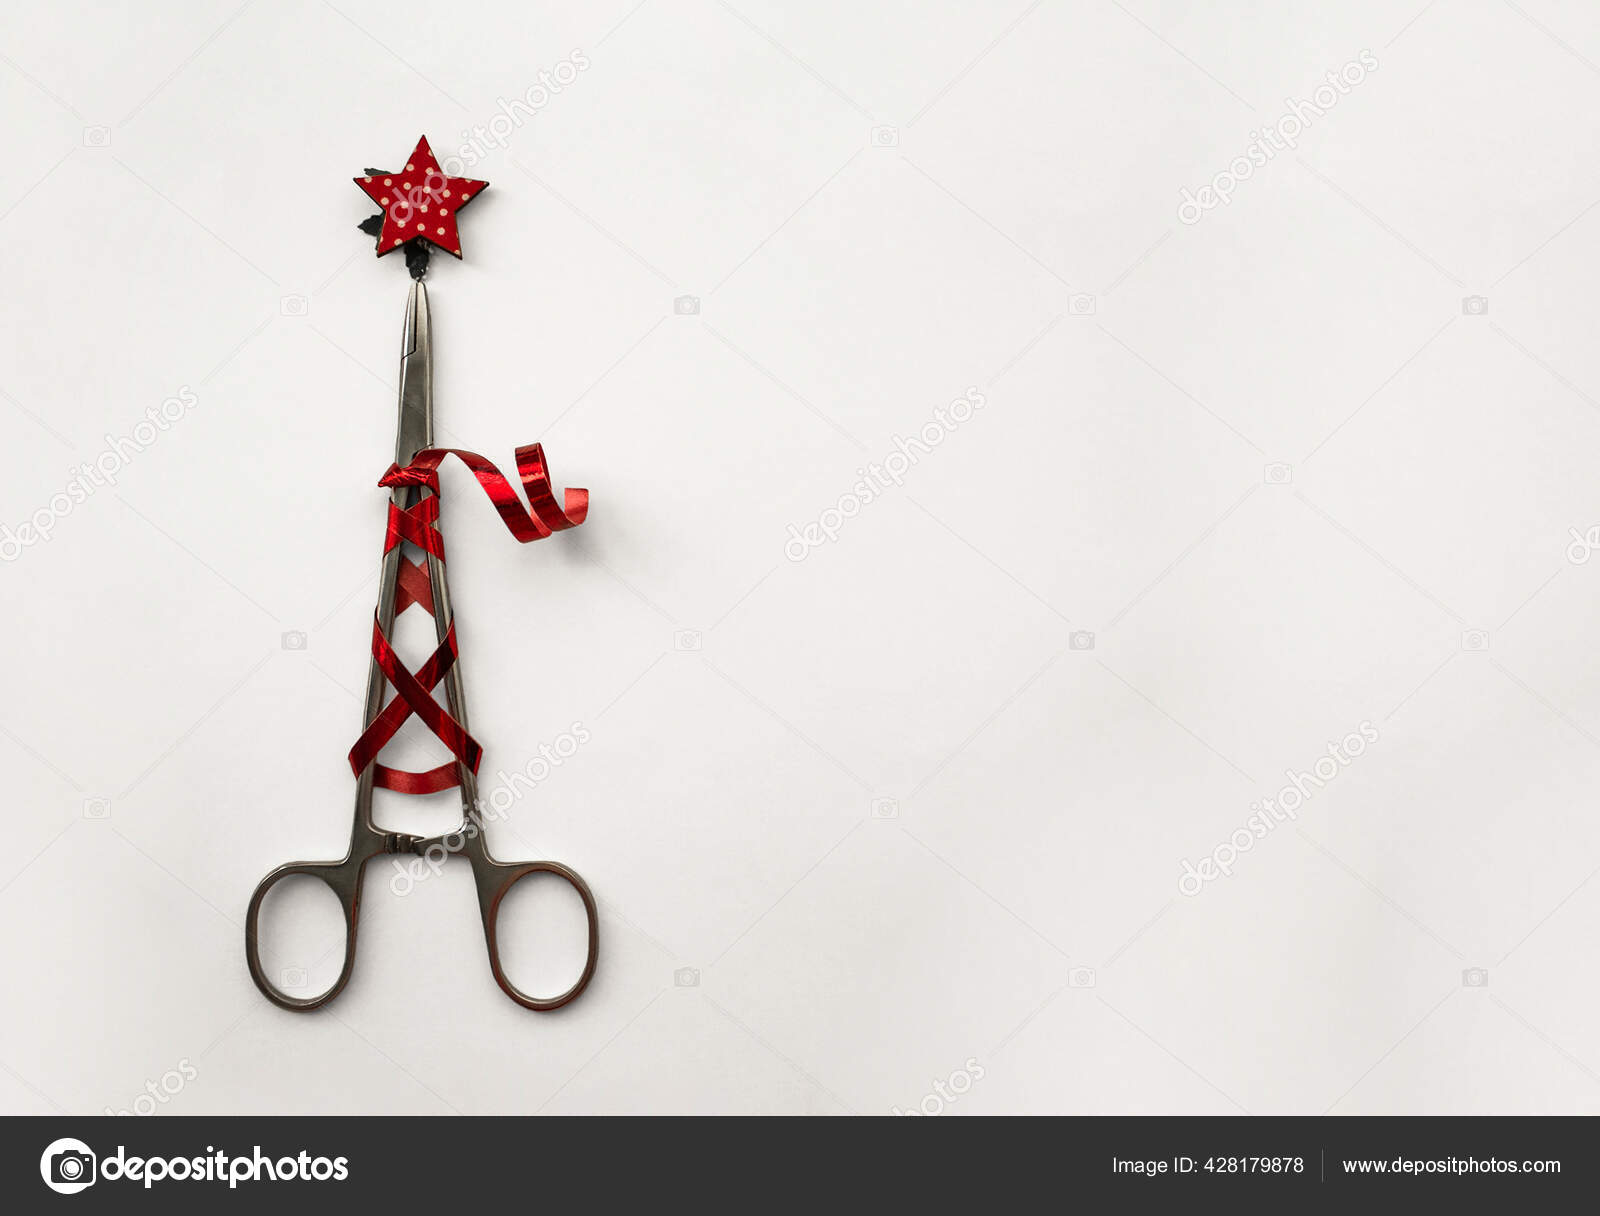 Surgical clip with festive red ribbon and star. Christmas tree made of  surgical instruments on a white background with space for text.  Minimalistic banner for congratulating doctors on the New Year Stock